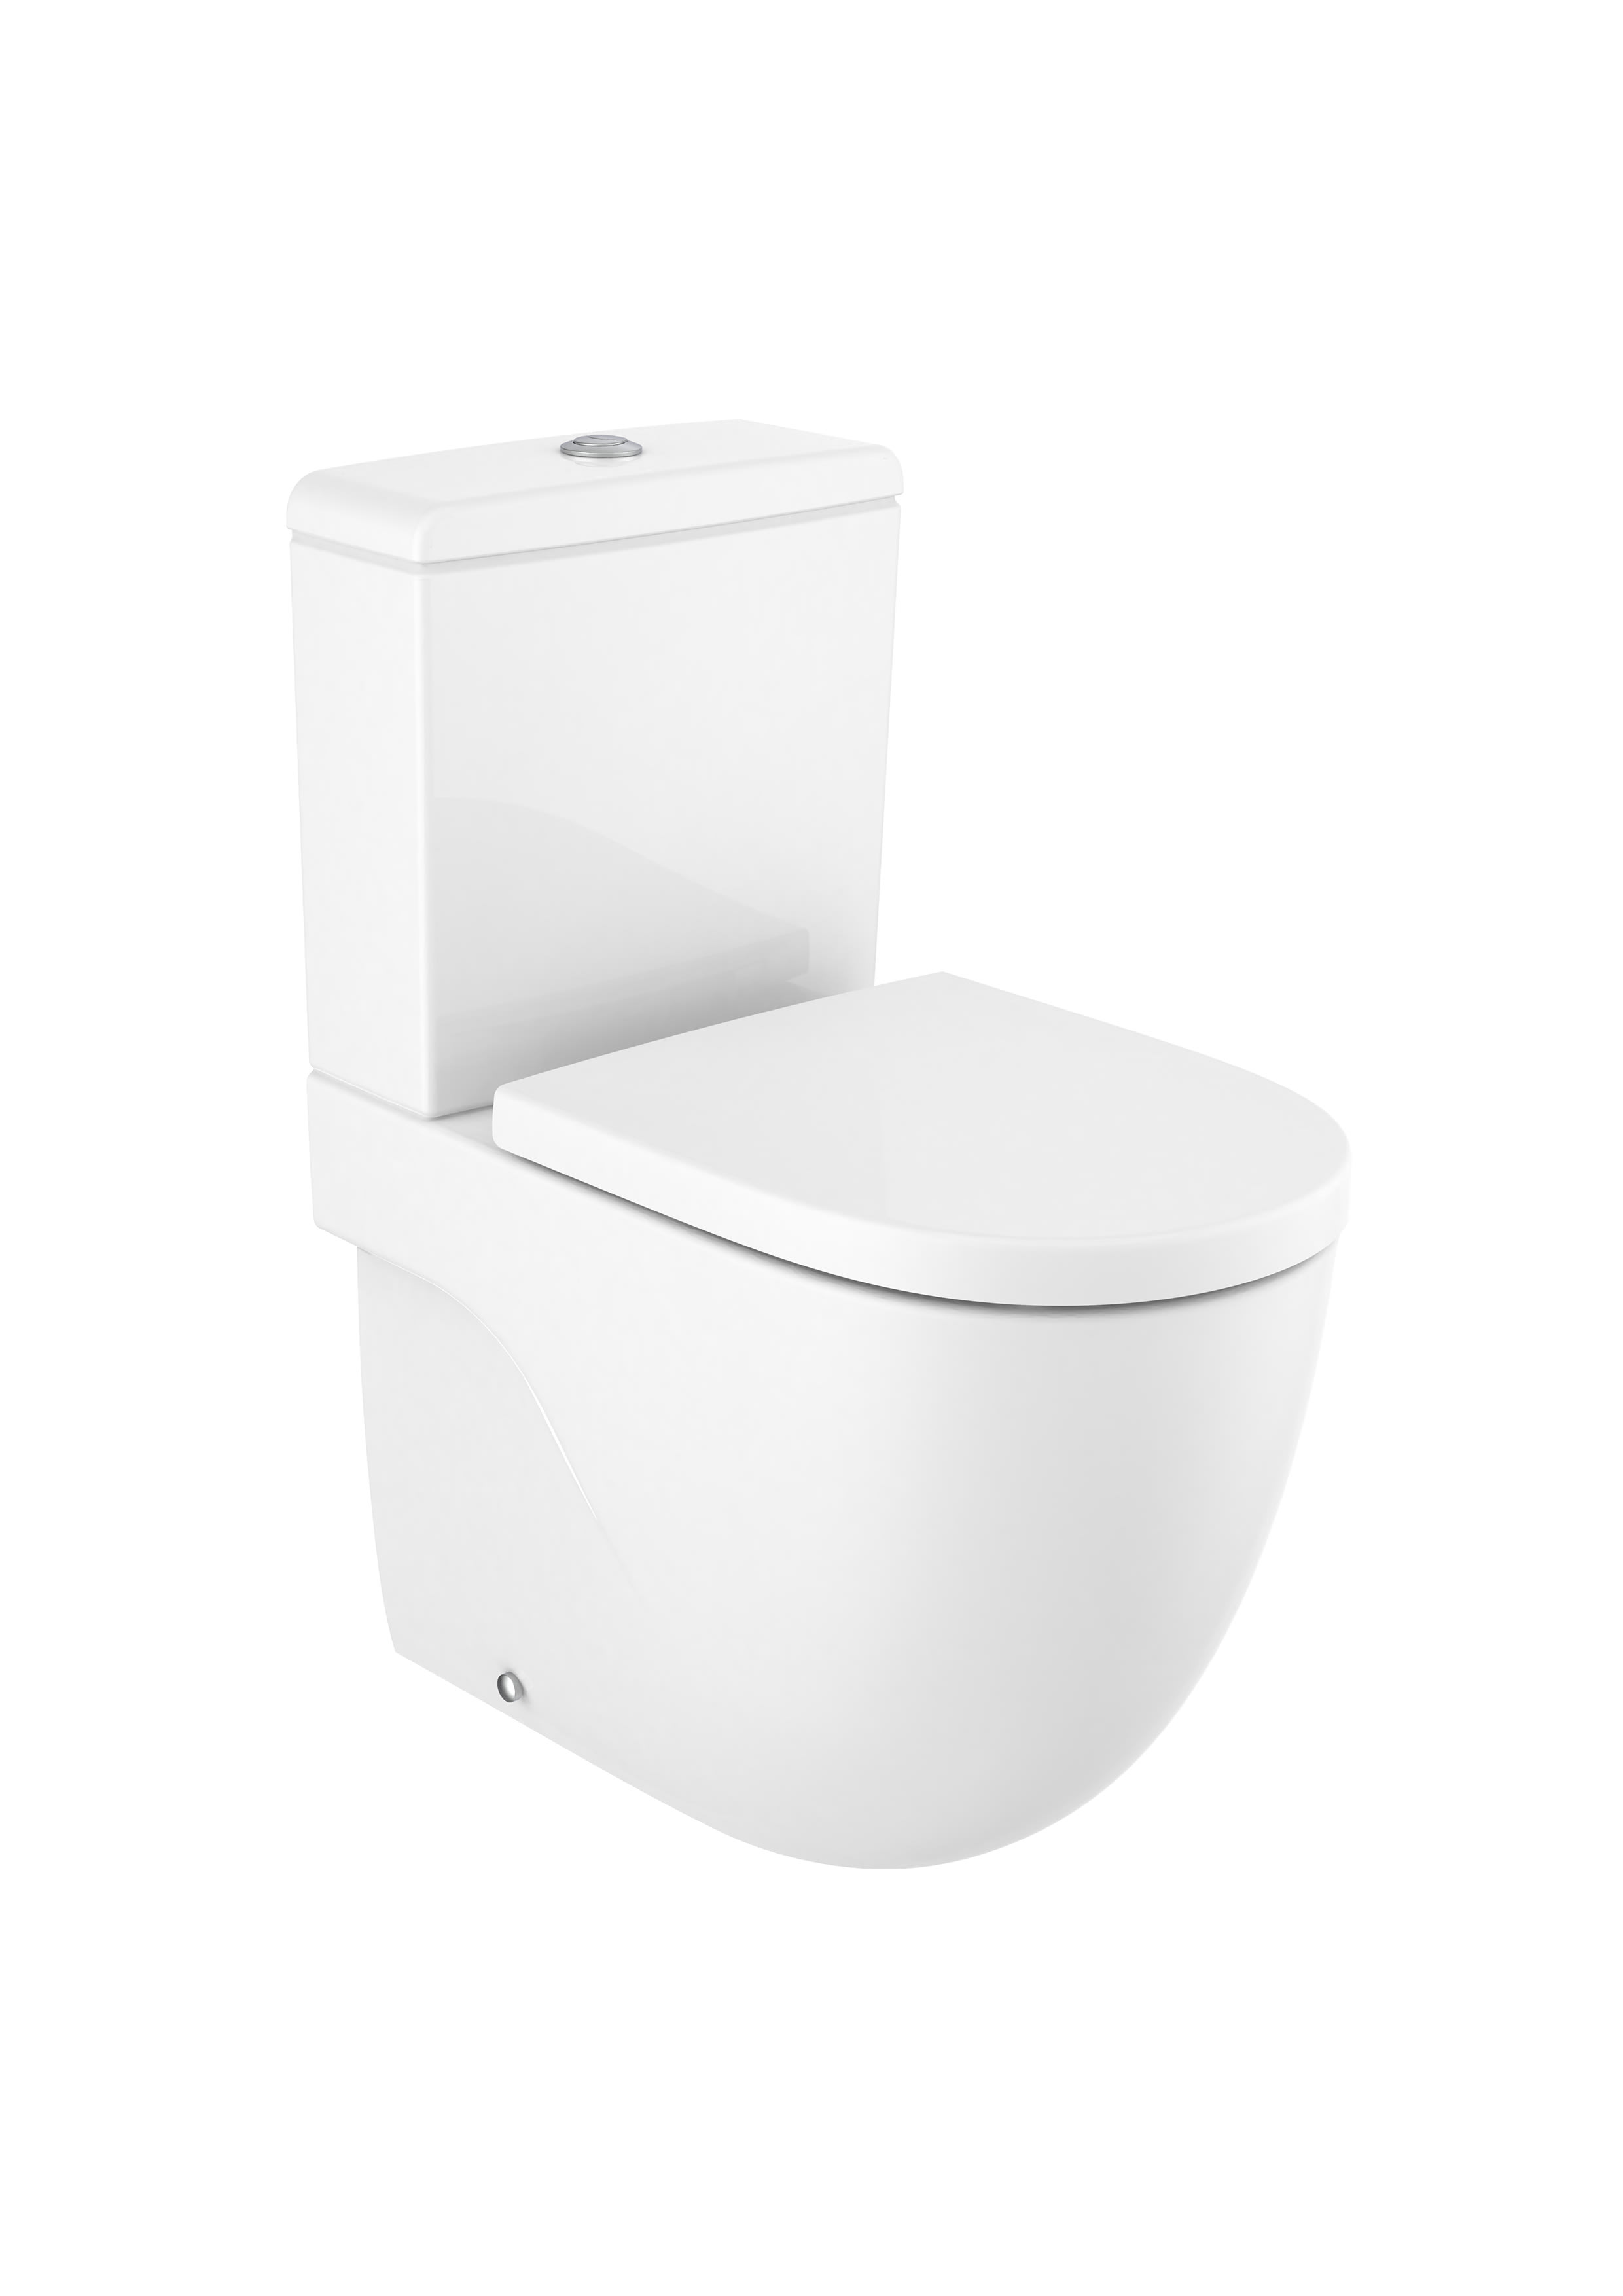 Roca Meridian-N Compact Rimless Close Coupled Pan - White 12